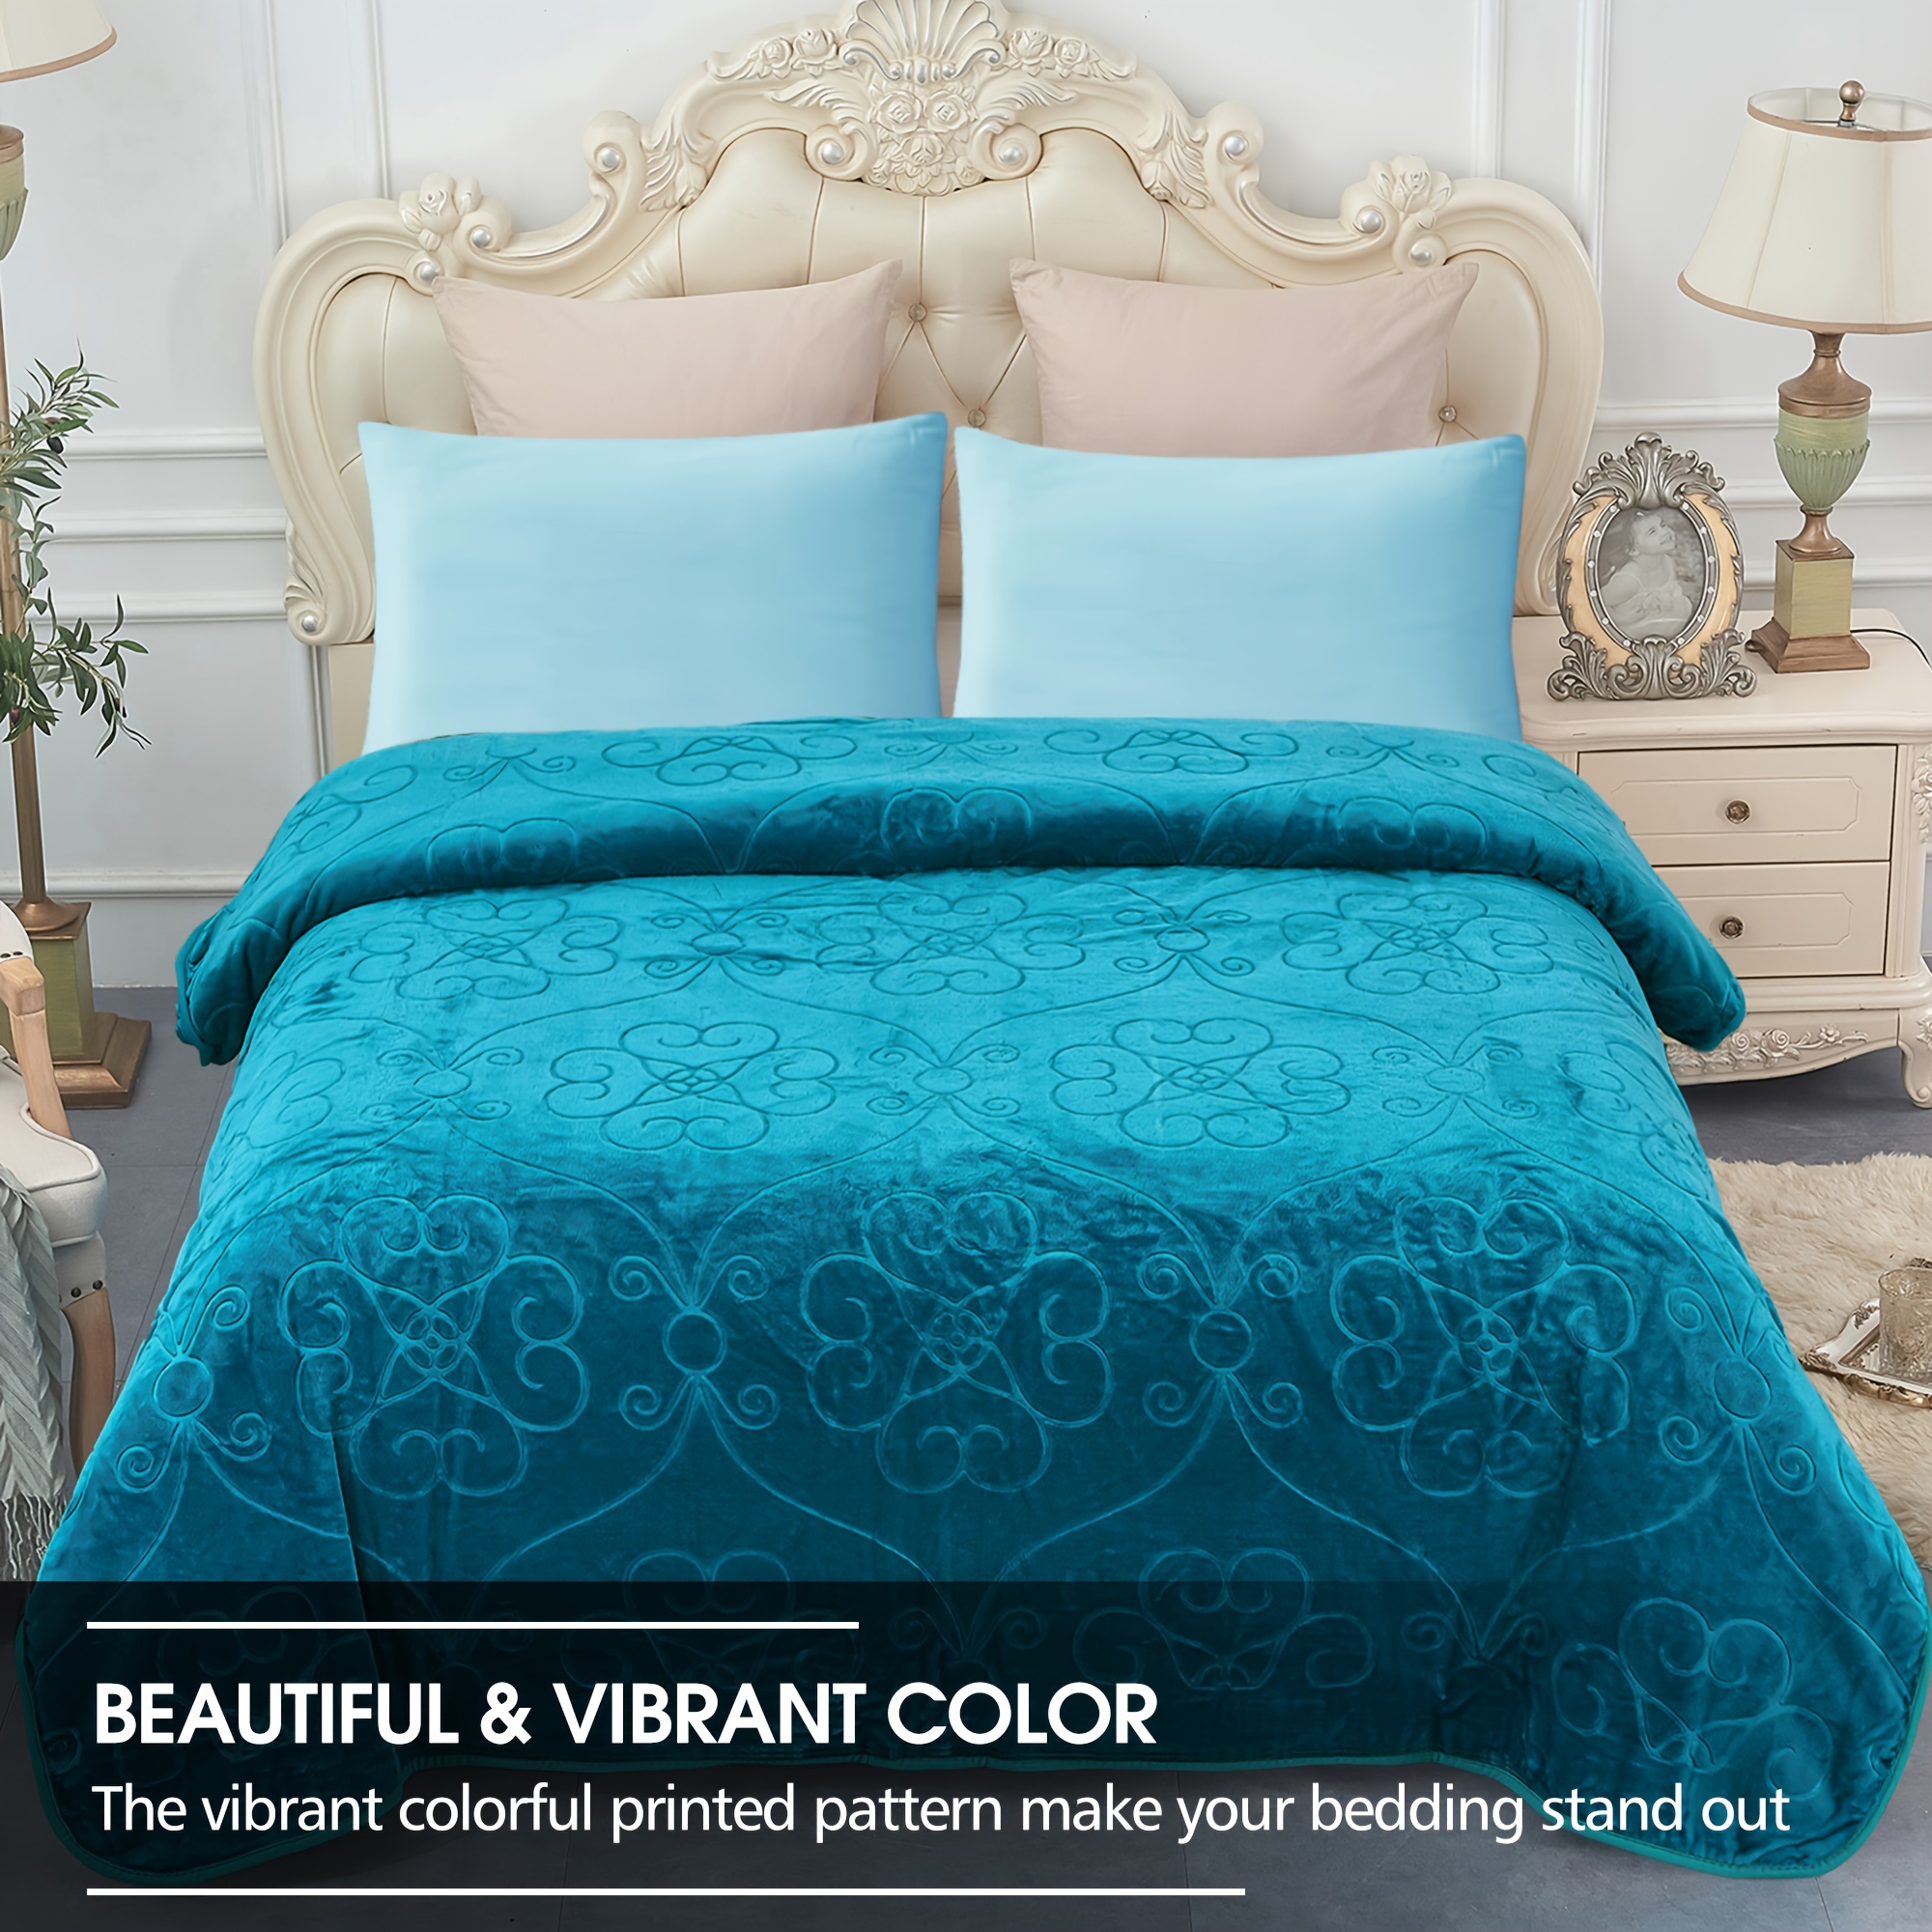 

1 Ply Polyester Embossed Blanket 3.5 Lb Korean Queen 75 X 91in- Super Soft Cozy Fuzzy Solid Blanket For Bed 5 Elegent Colors To Match Different Home Decor Styles For All Season